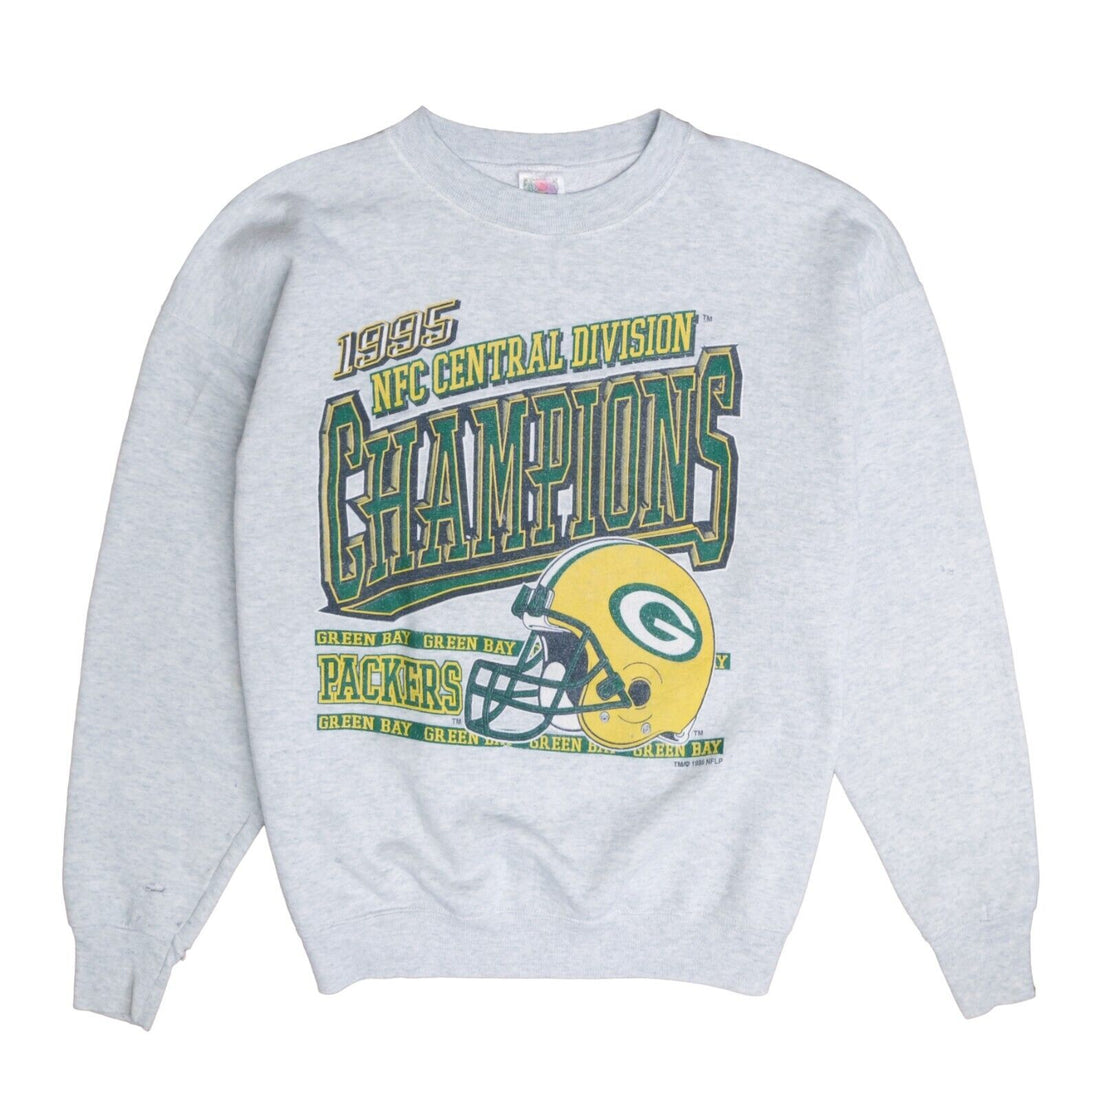 Vintage Green Bay Packers NFC Champions Sweatshirt Size XL 1995 90s NFL